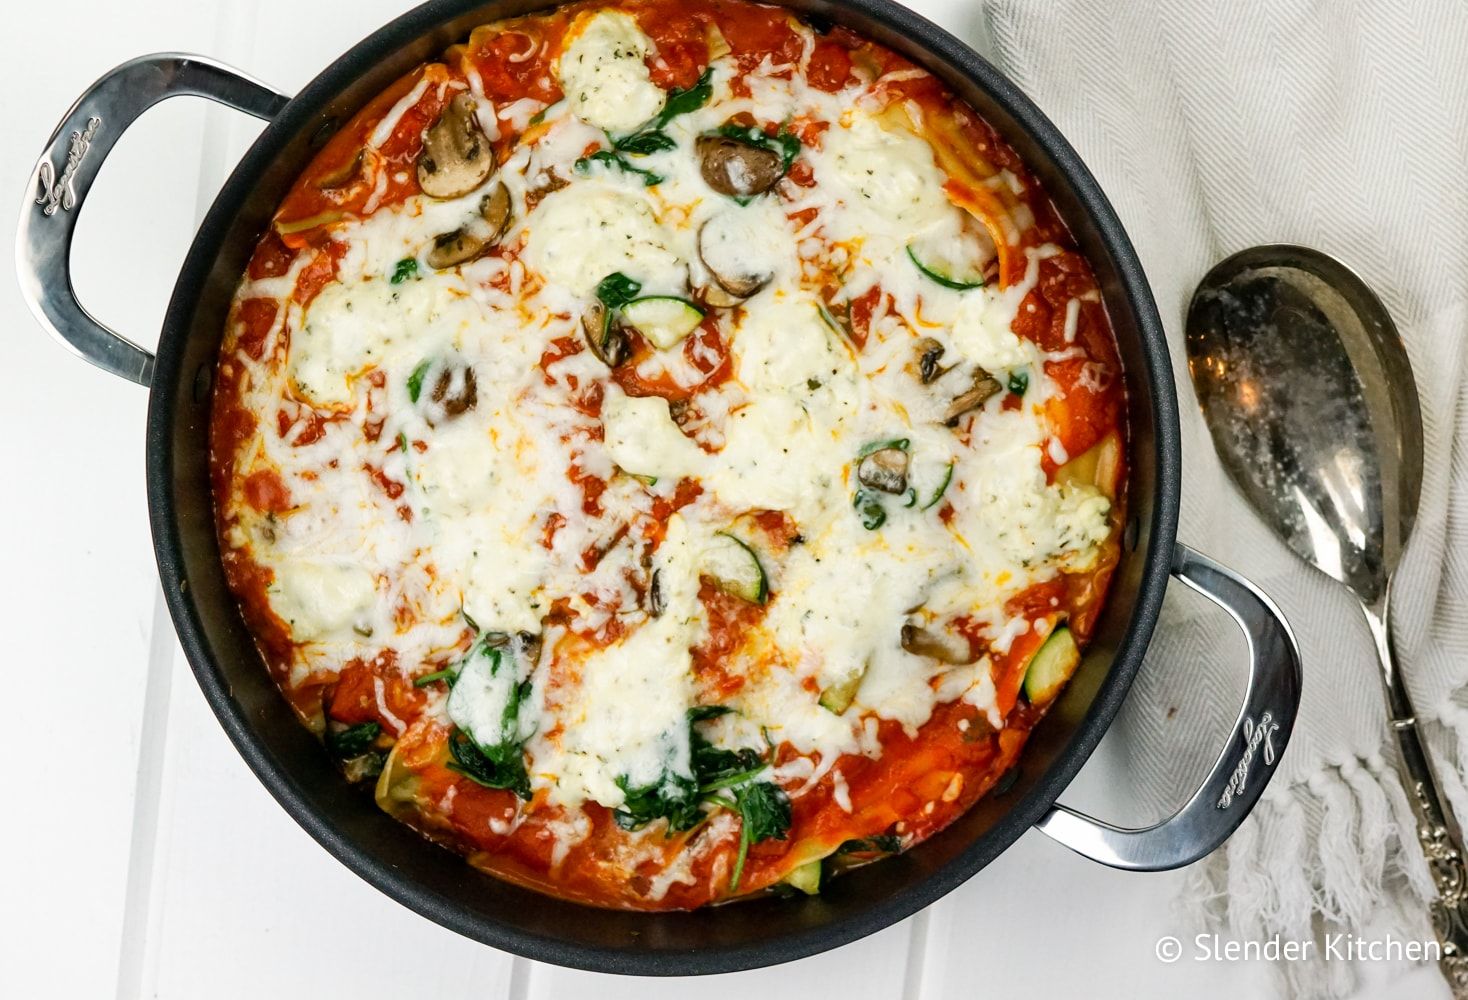 Skillet lasagna with mushrooms, spinach, lasagna noodles, sauce, and a layer of melted cheese in a skillet.